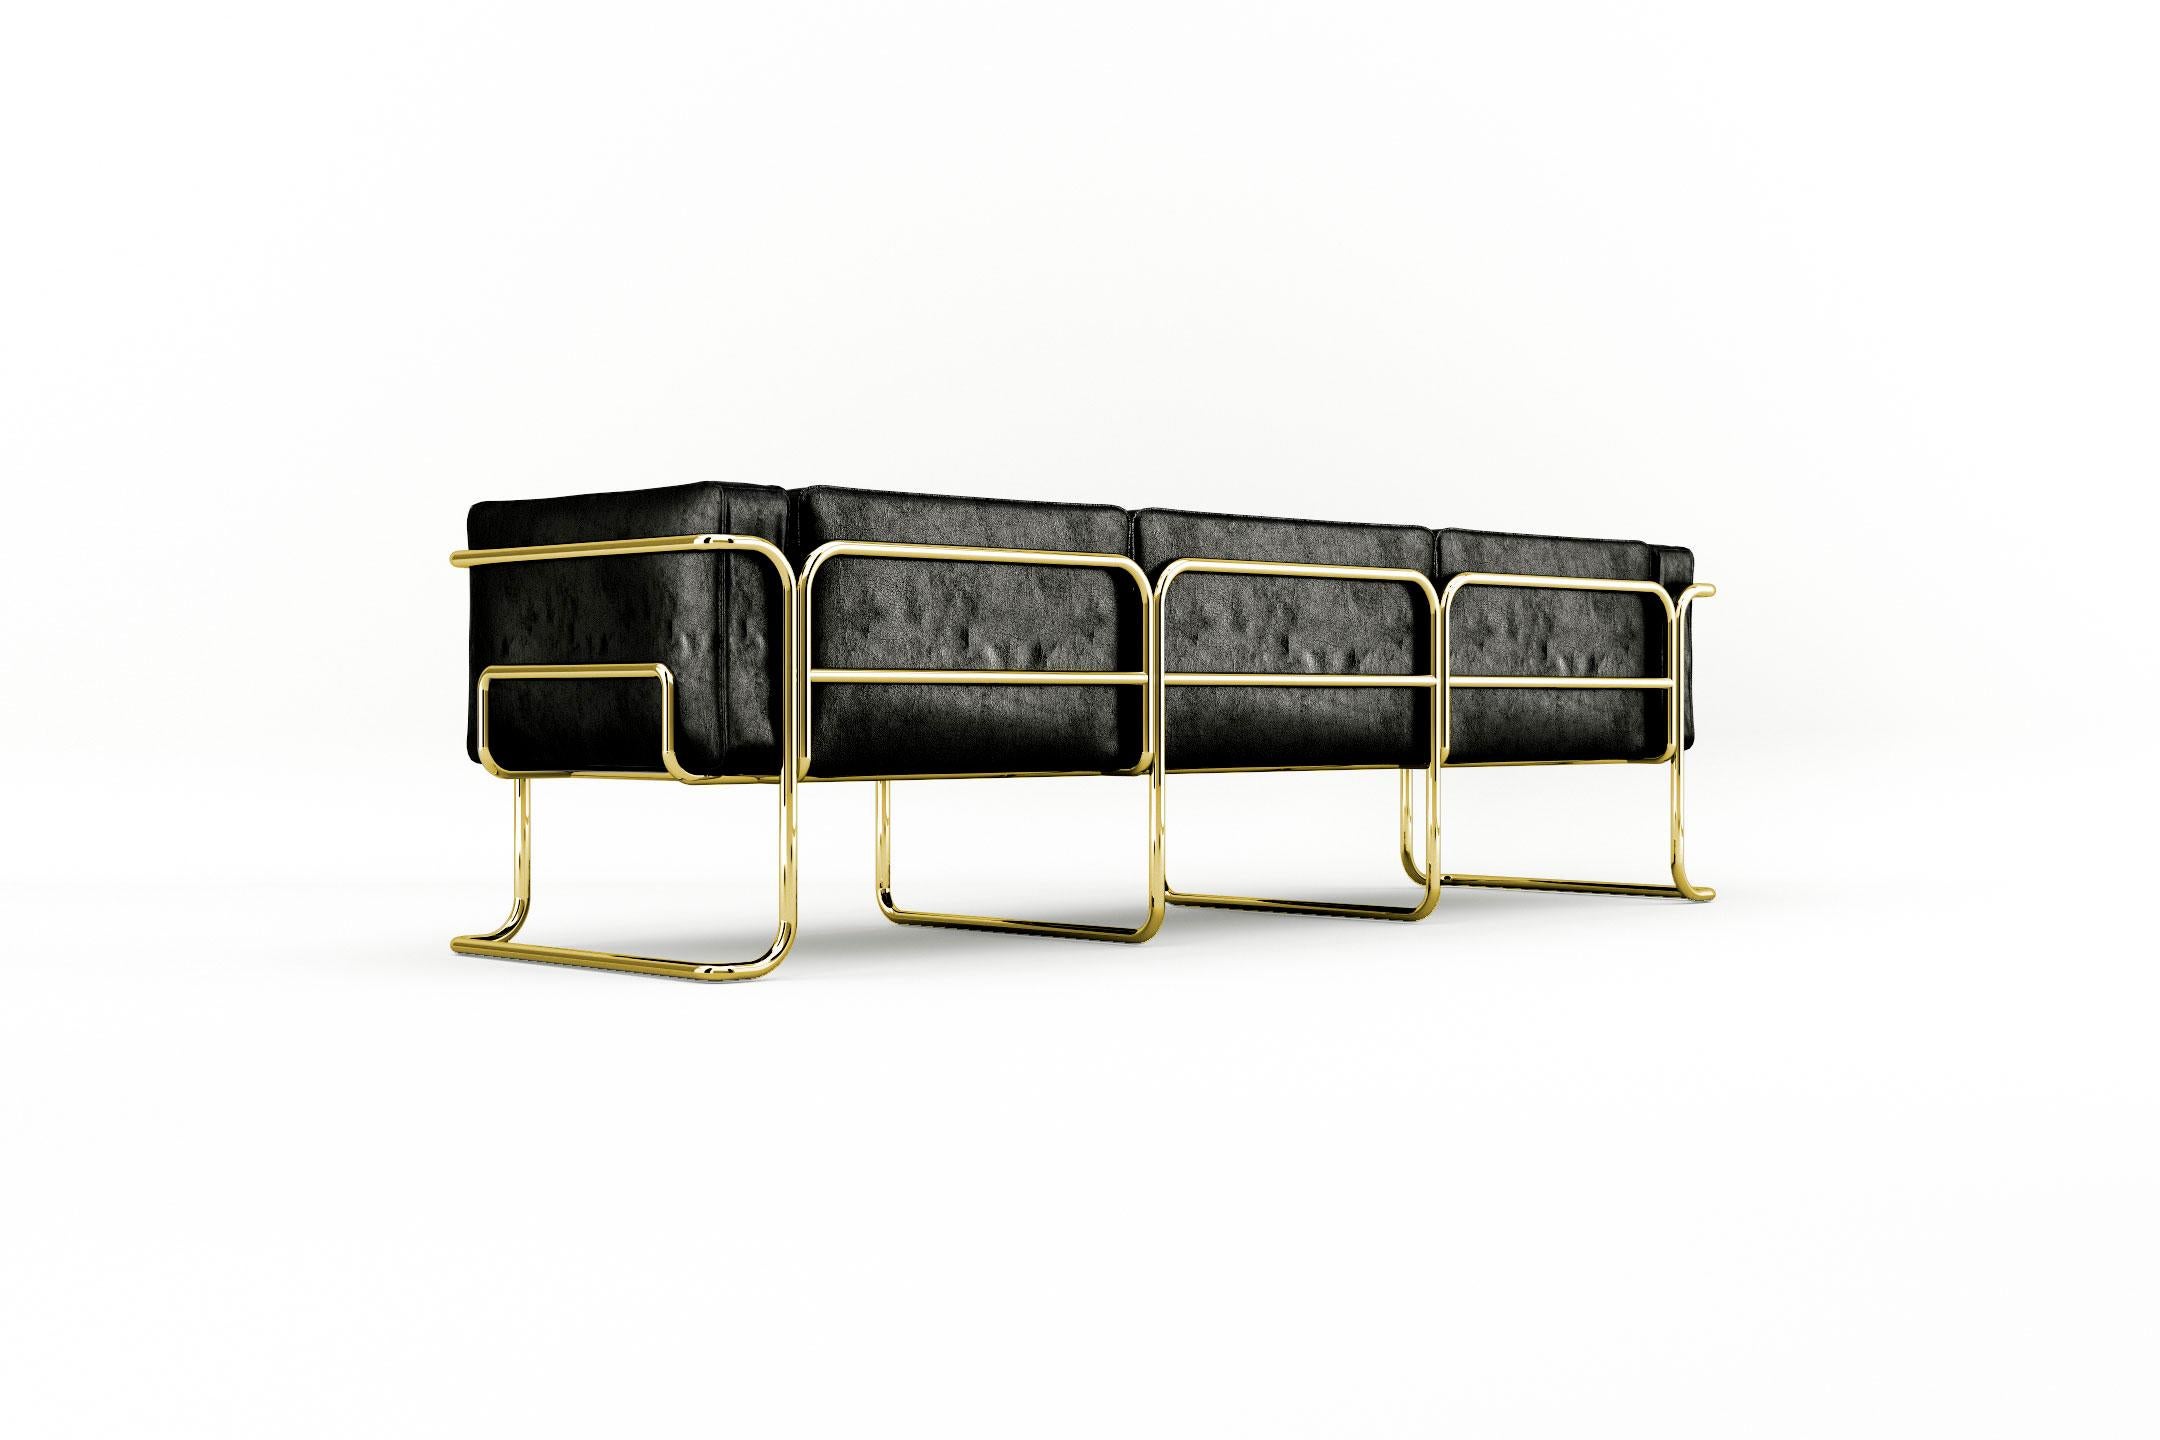 Polished Lotus 3 Seat Sofa - Modern Black Leather Sofa with Brass Legs For Sale